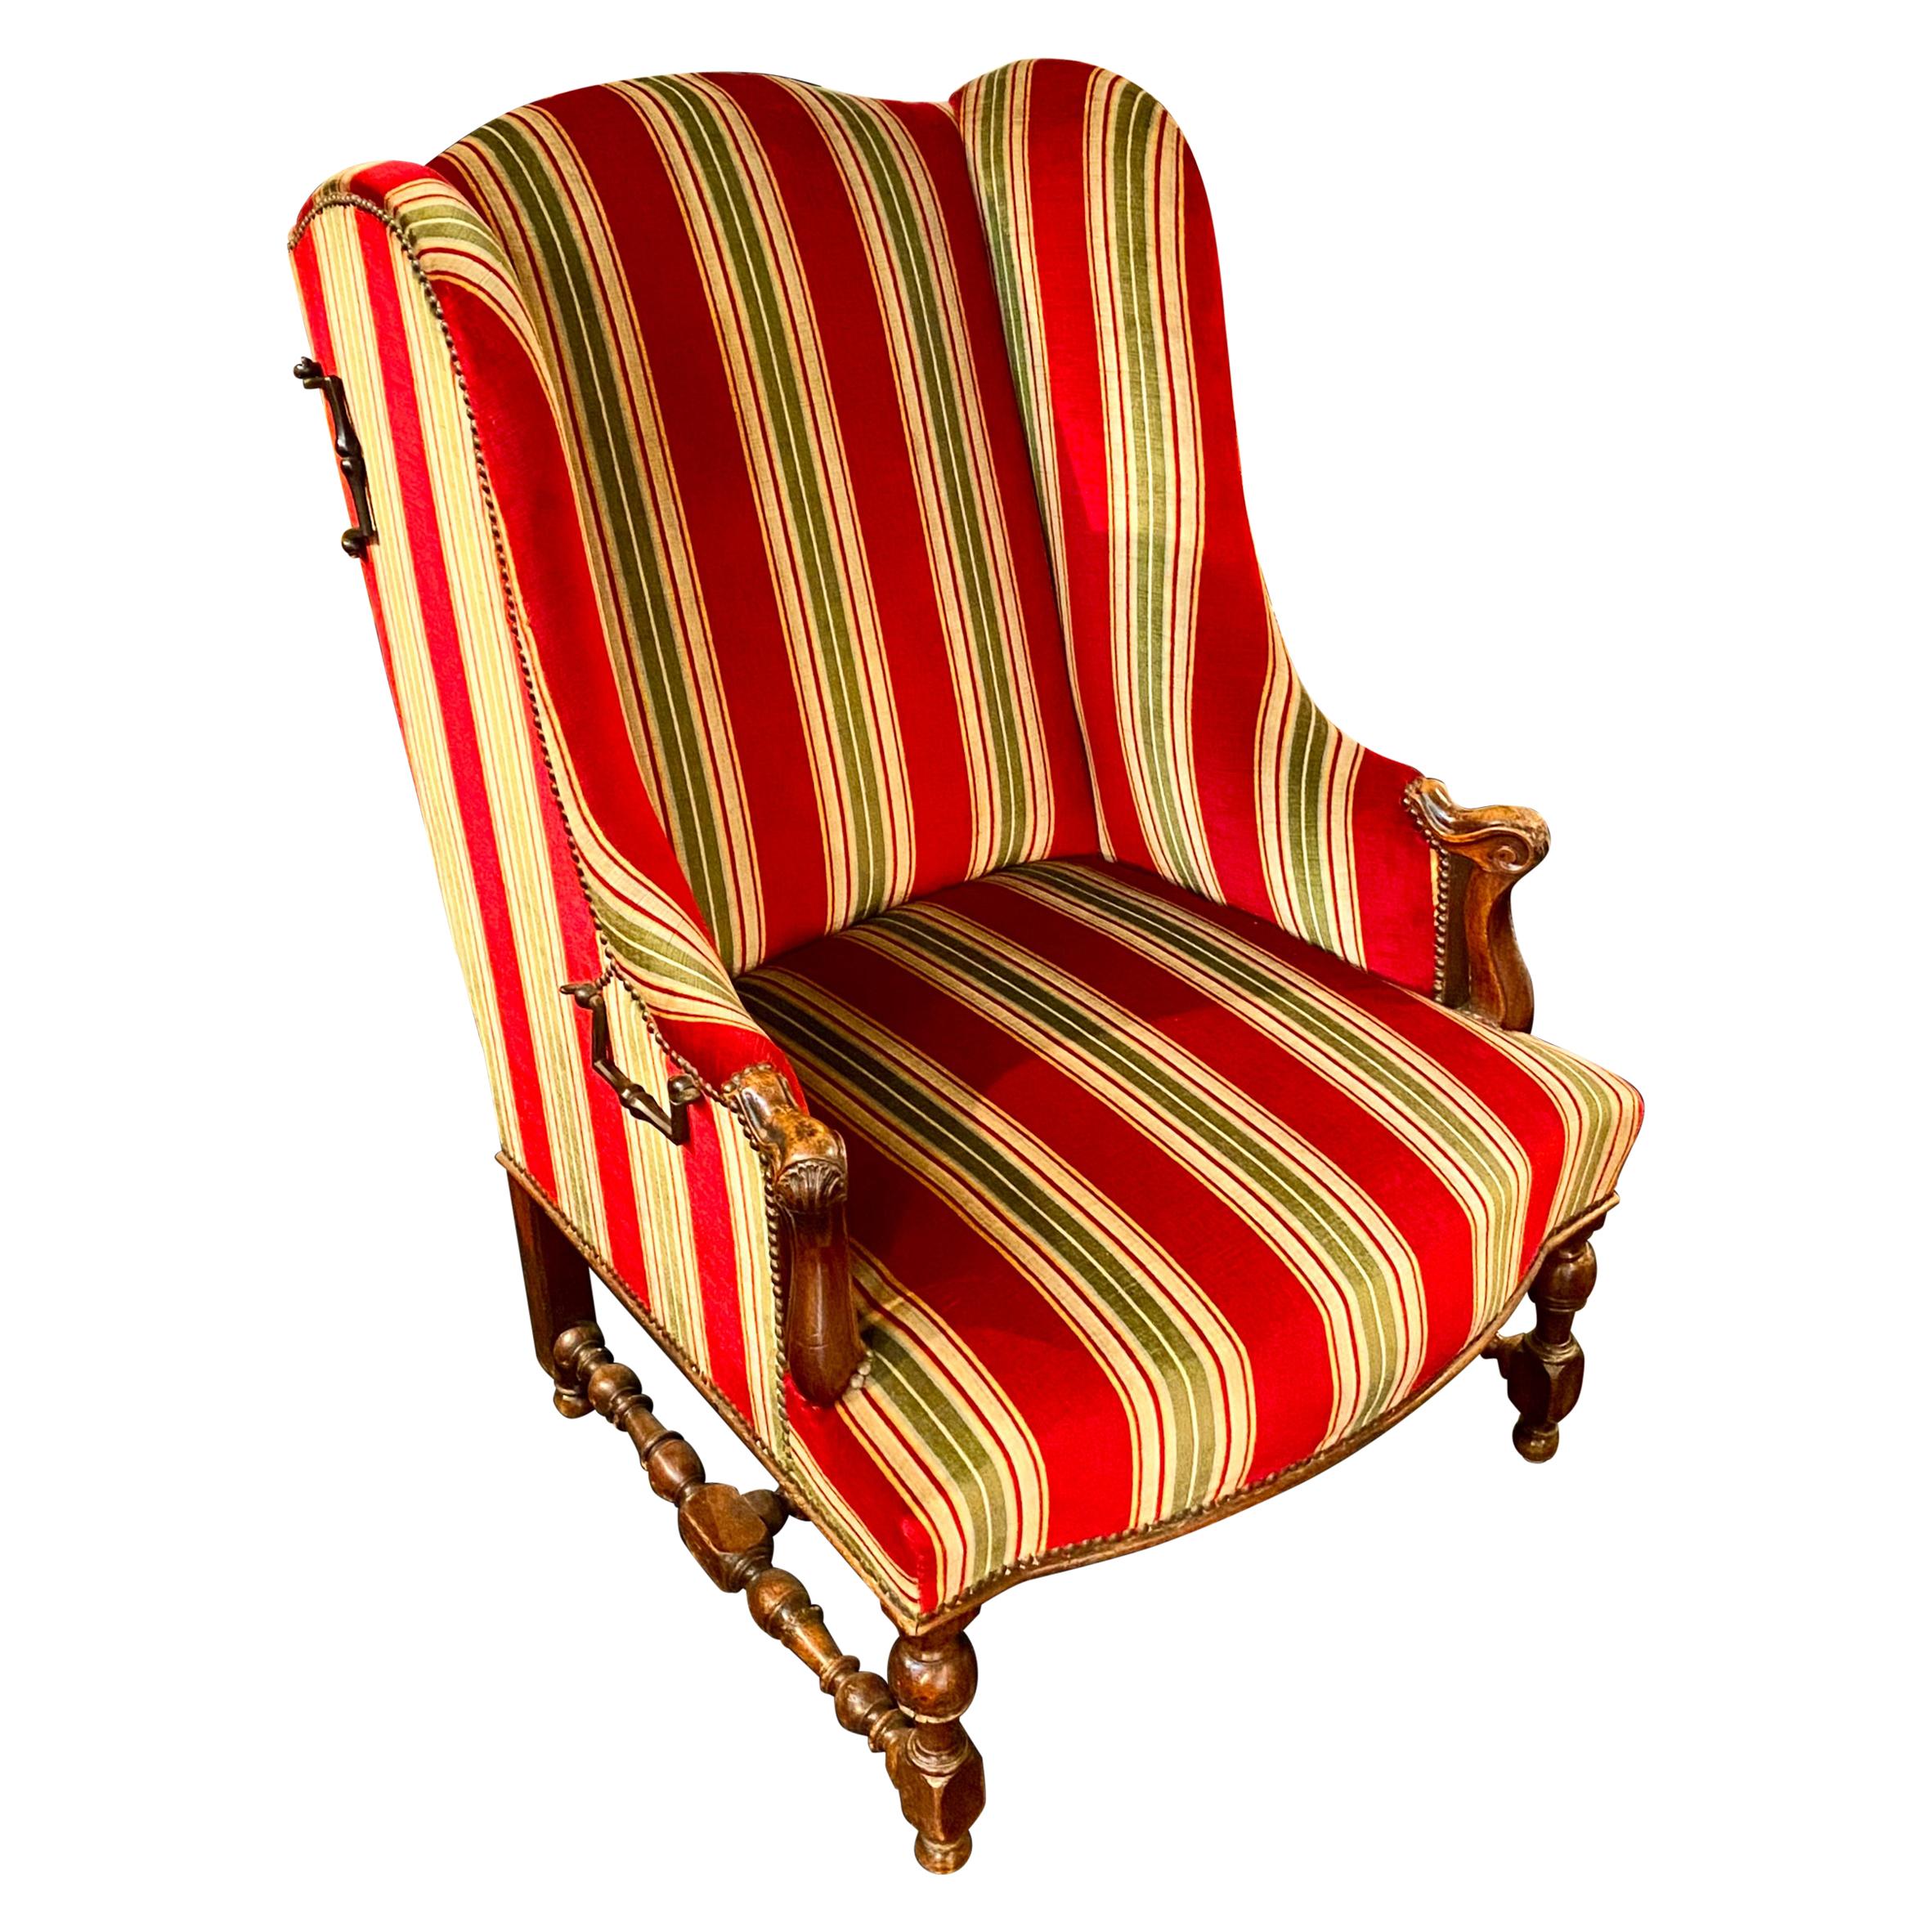 Large French Louis XIII Wingback Armchair, with Headrests, 18th-Century